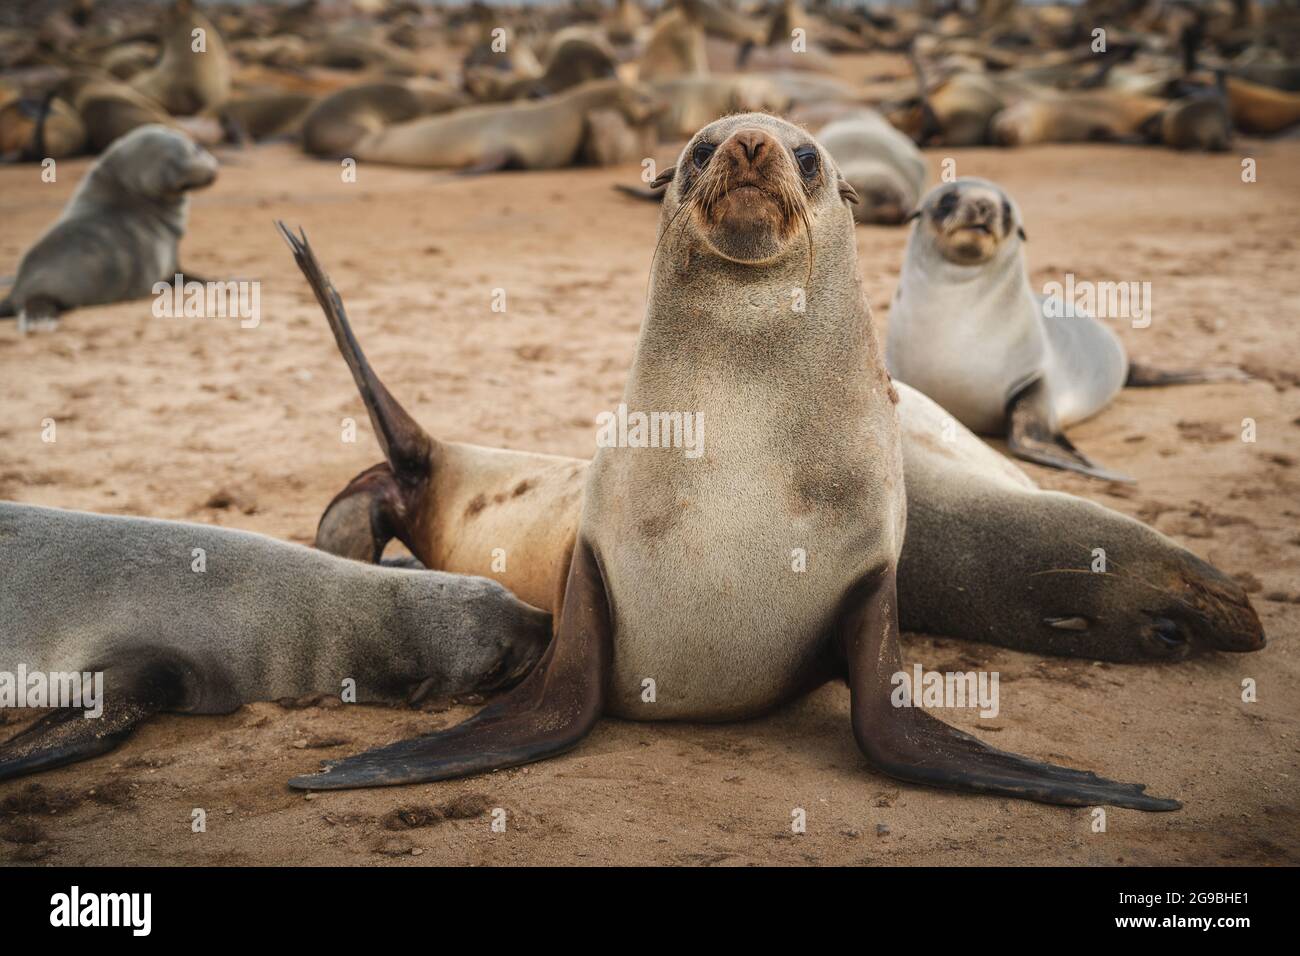 Seals at the Cape Cross Seal Reserve on the Skeleton Coast, Namibia. Cape Cross is home to one of the largest colonies of Cape fur seals in the world. Stock Photo